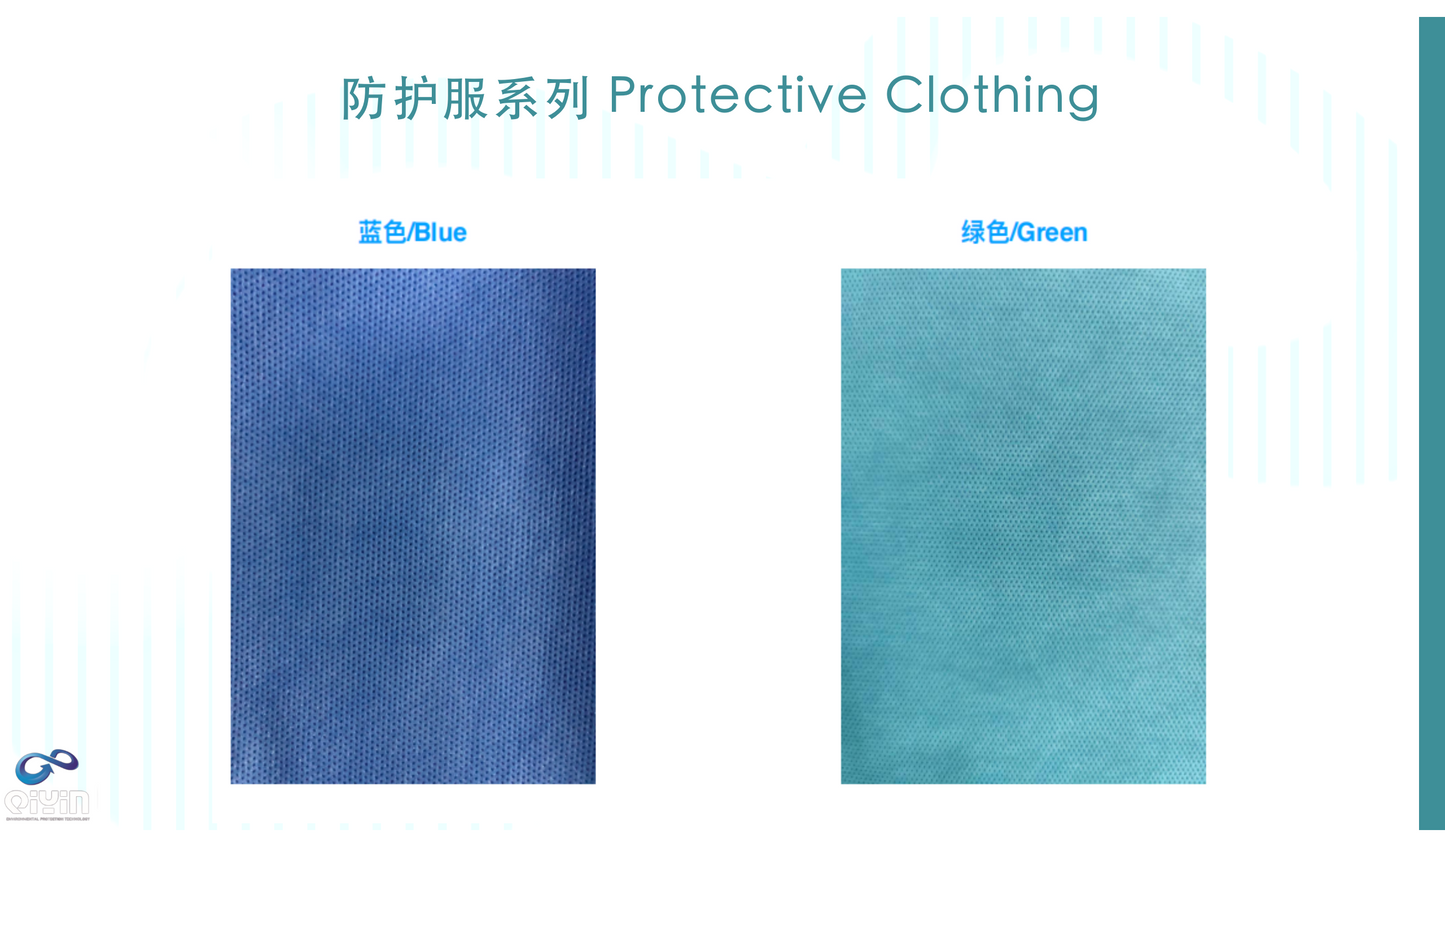 Melt-blow nonwovens for mask and protective clothing